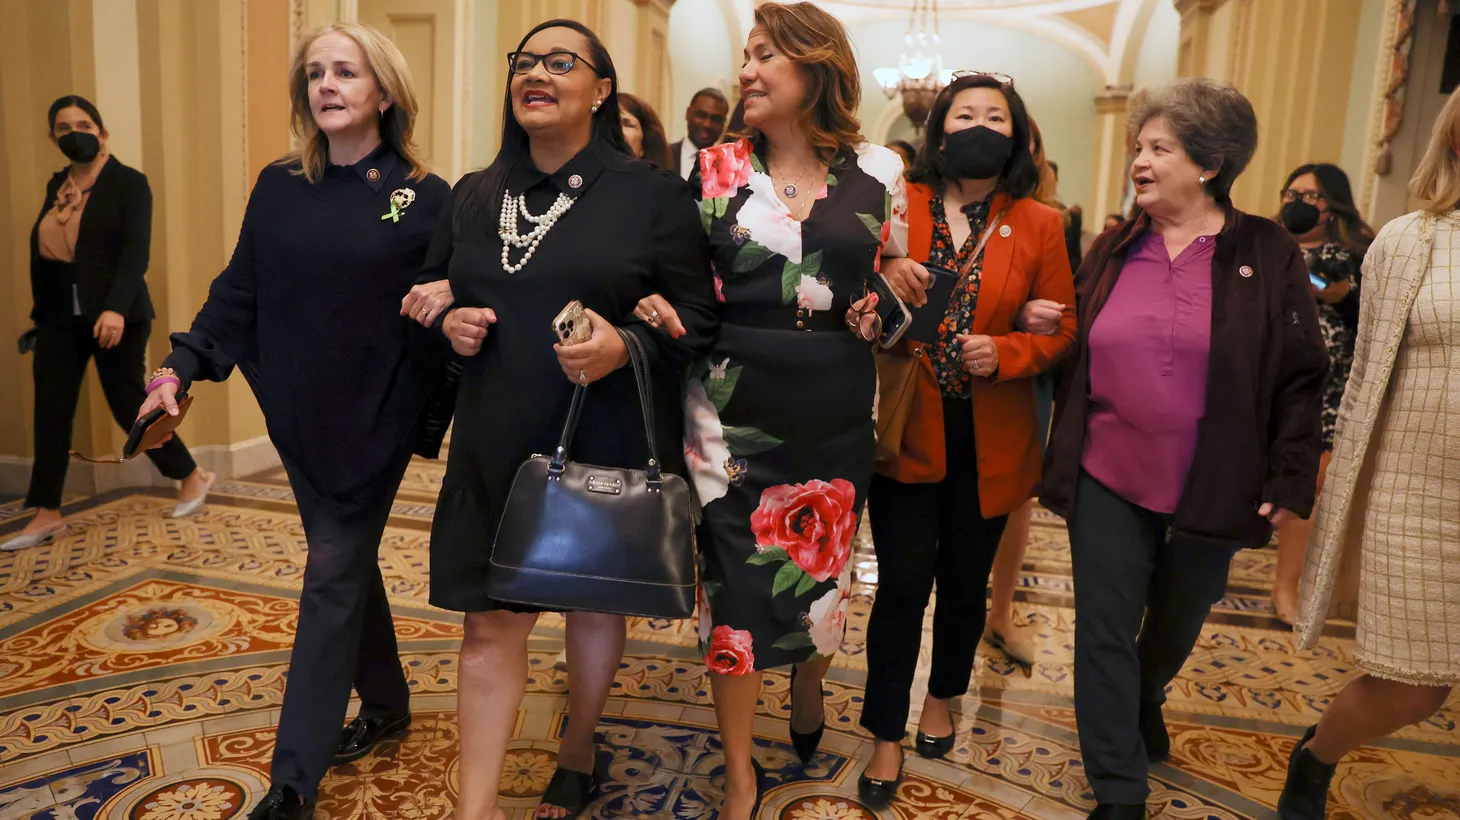 U.S. Rep. Madeleine Dean (D-PA), Rep. Nikema Williams (D-GA) and Rep. Veronica Escobar (D-TX) lead a march of Democratic women members of the U.S. House of Representatives around the Senate Chamber to protest abortion rights in Washington, U.S. A measure to codify Roe v. Wade failed 51-49 in the Senate on May 11, 2022.